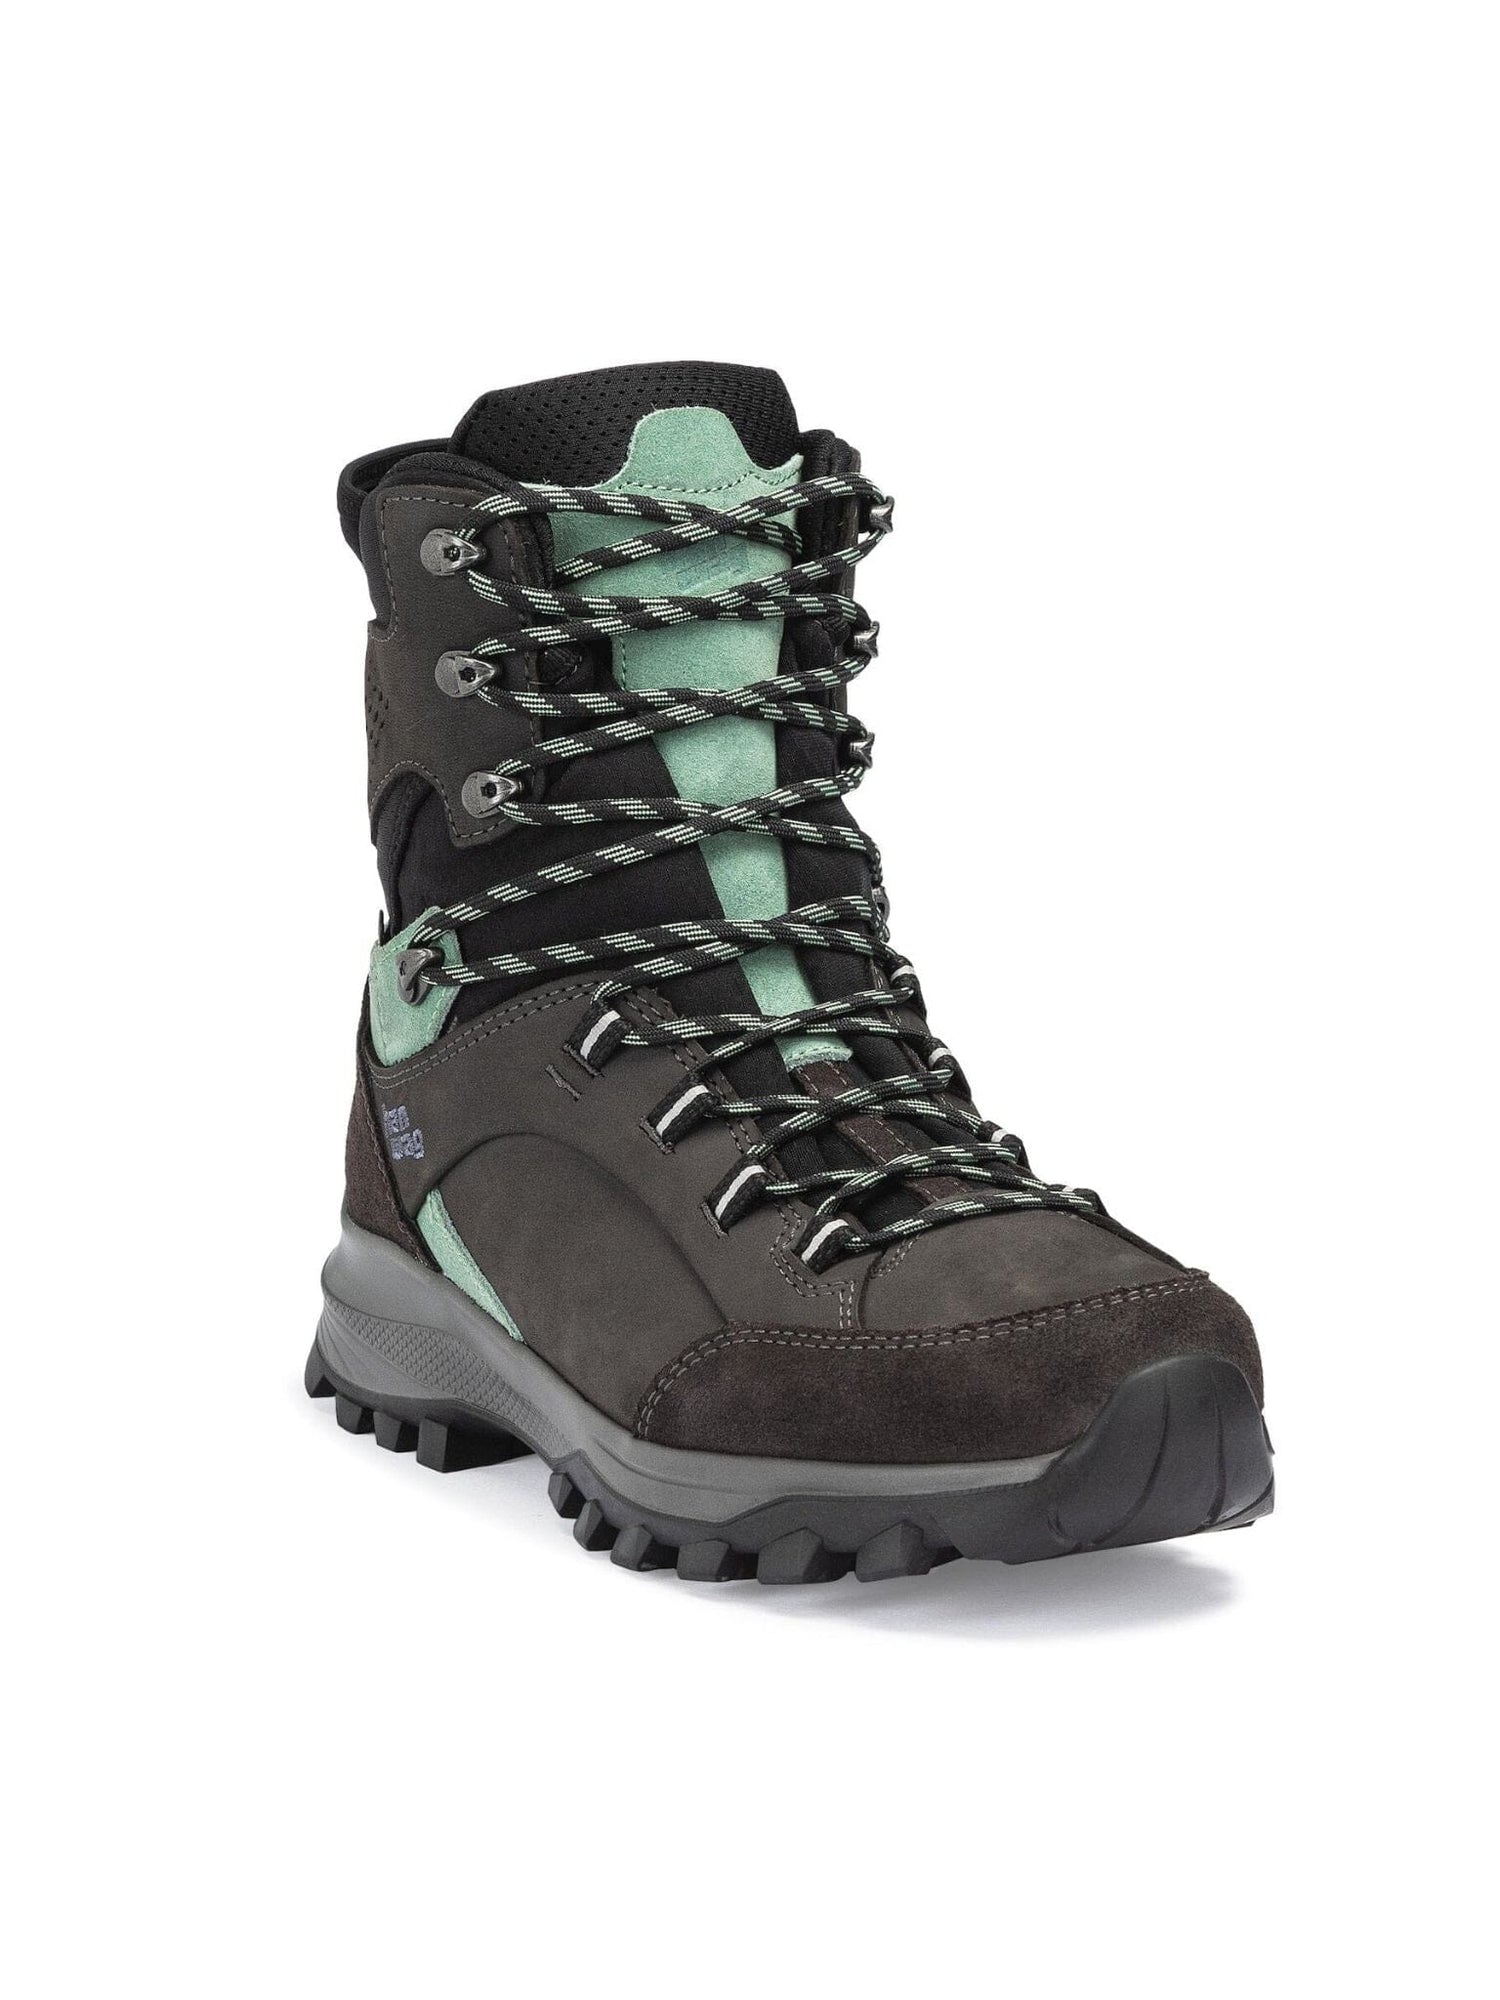 Hanwag W's Banks Snow GTX Winter Shoes - Leather Working Group -certified nubuck leather Asphalt/Mint Shoes